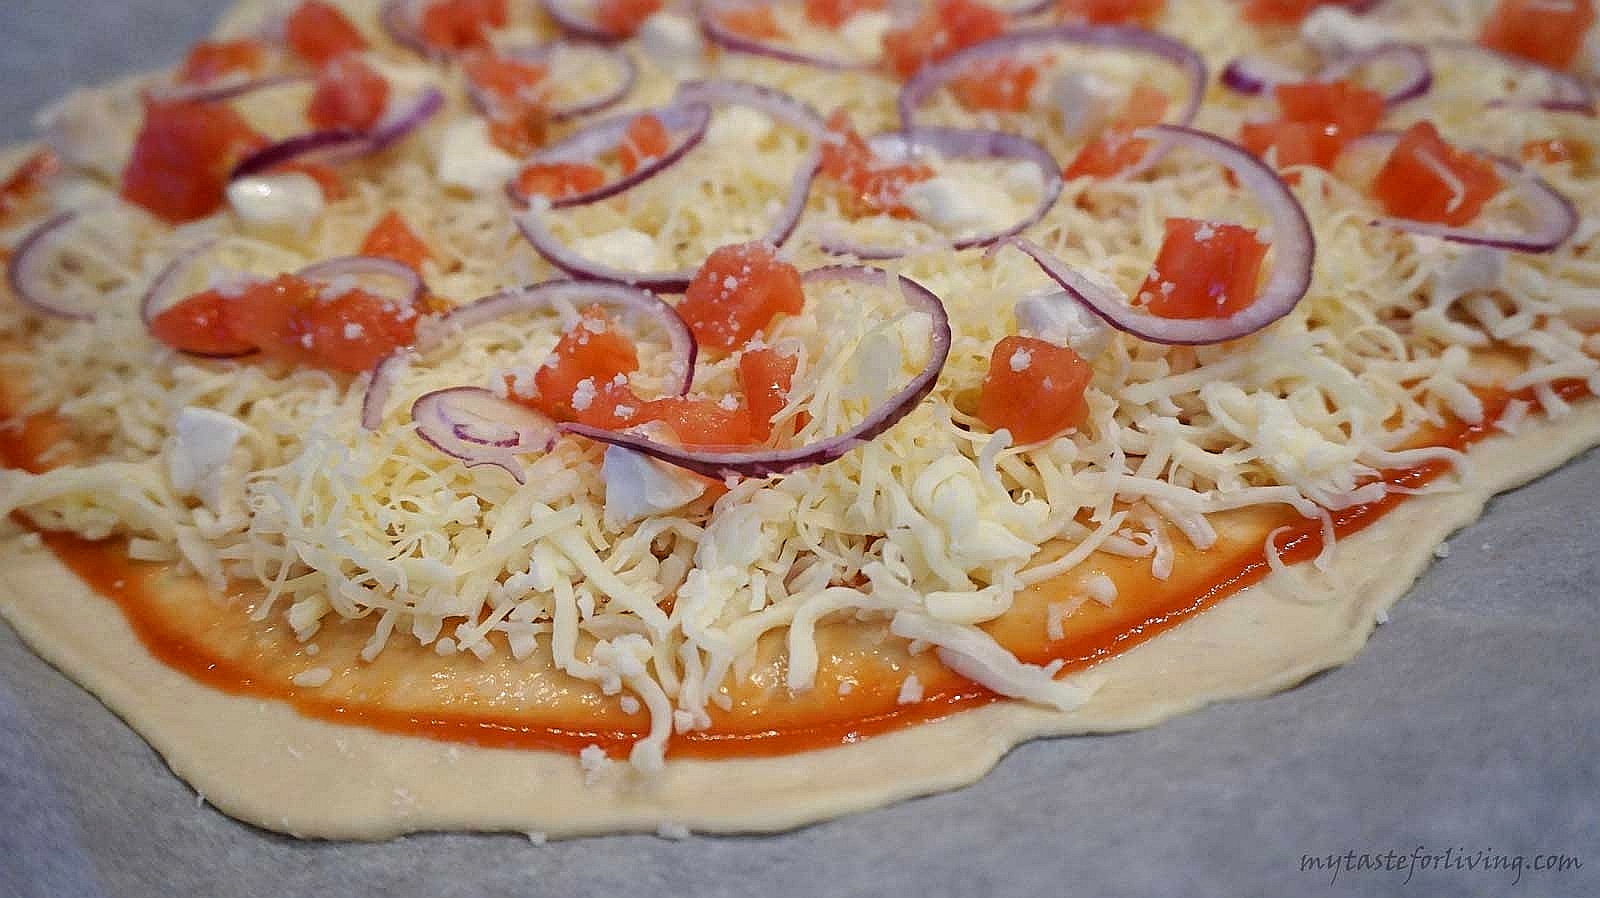 I like the pizza, which is obtained with thin dough and crispy and delicious edges. I offer you a recipe for pizza dough with einkorn flour, which is easy to prepare and the result is really worth it!